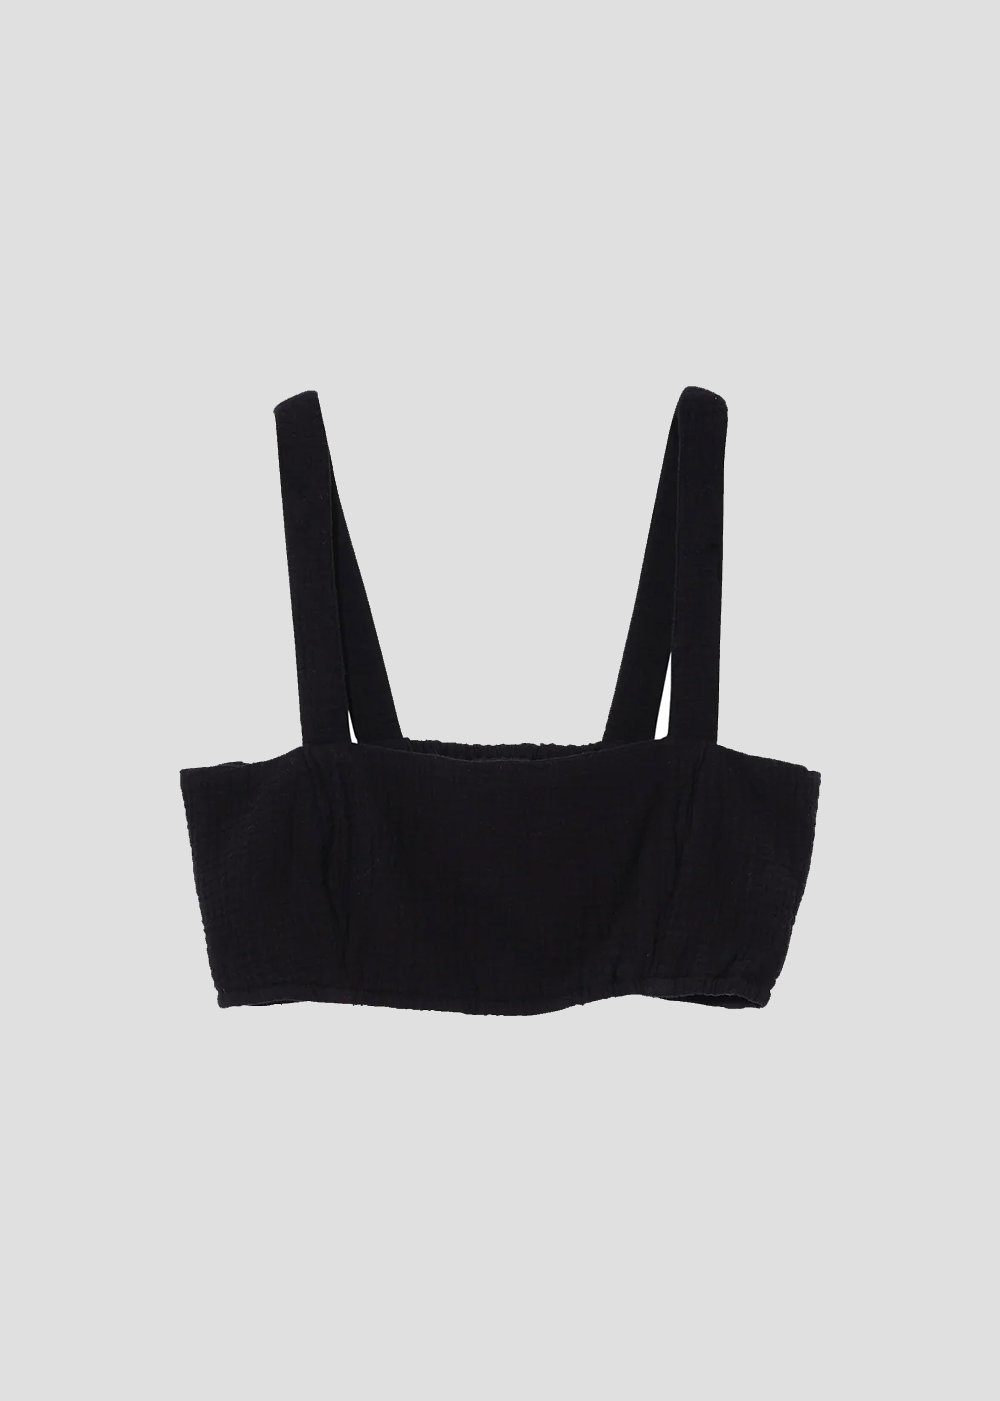 front view of the black super soft cotton bra top in white from Echo New York.